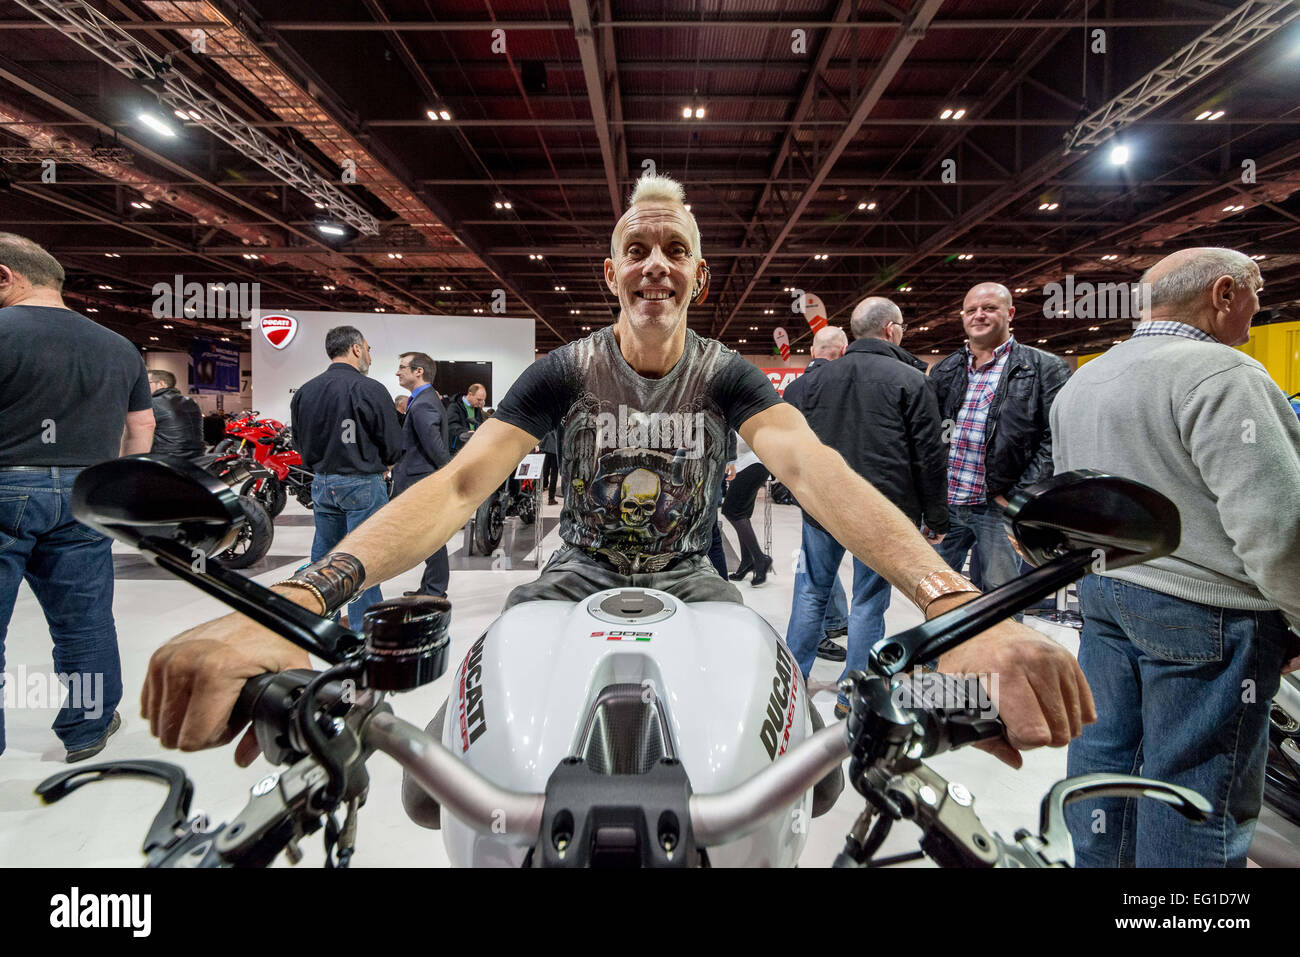 Feb. 13, 2015 - This unbelievable line-up of new models coming from the world's leading manufacturers straight to the Carole Nash MCN London Motorcycle Show.Visitors over the three days will get to see new machines such as the BMW R1200R, Ducati Scrambler, Kawasaki H2, KTM 1290 Super Adventure, Suzuki GSX-S1000, Triumph Street Triple RX and the eagerly anticipated, all-new Yamaha YZF-R1. It's a multi stage, multi event and multi star-studded show that promises to pack the entire world of motorcycling into one massive weekend. © Velar Grant/ZUMA Wire/ZUMAPRESS.com/Alamy Live News Stock Photo